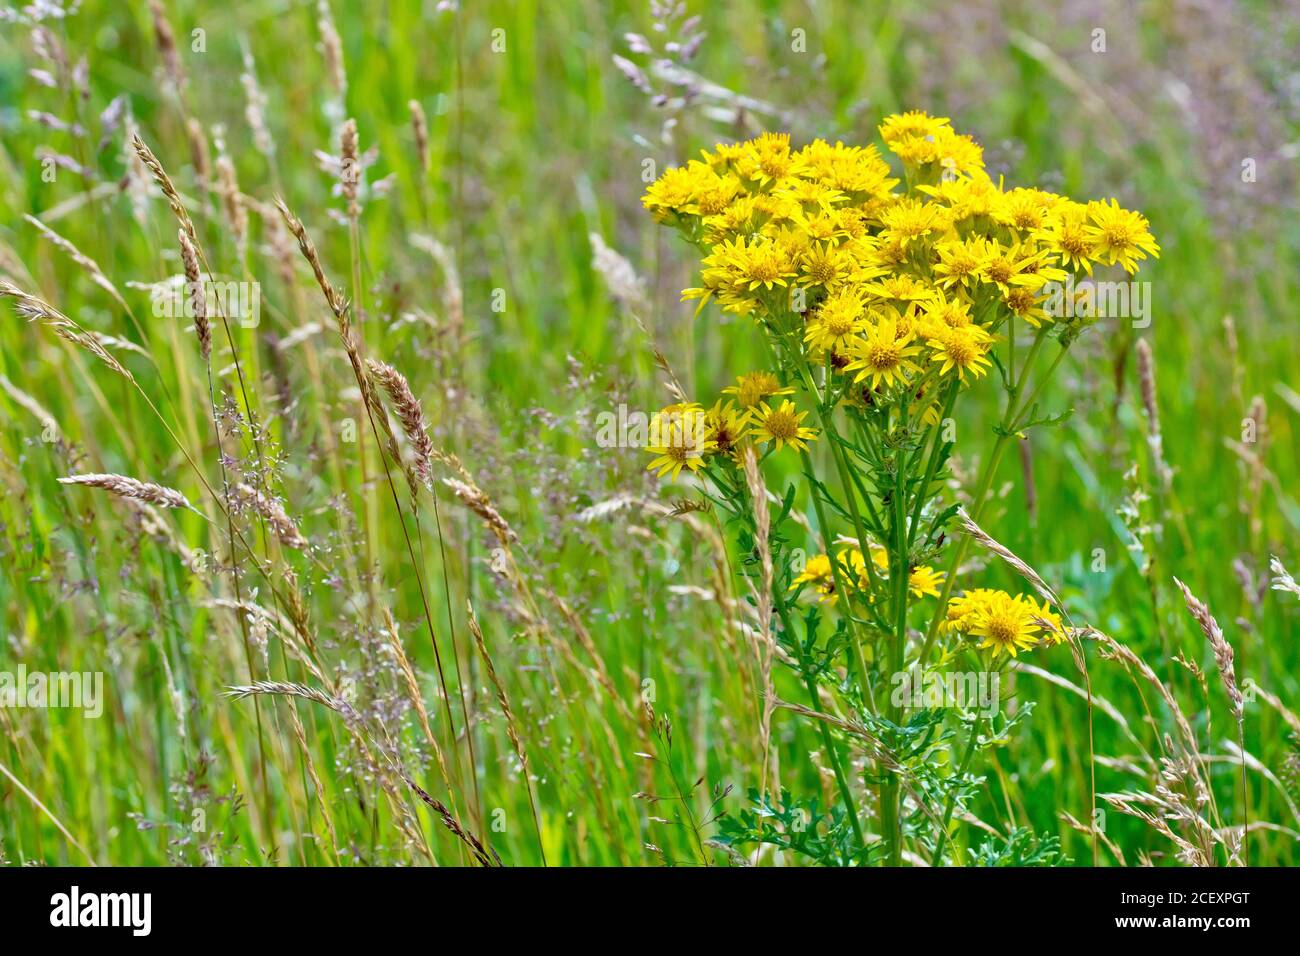 Common Ragwort (senecio jacobaea), close up of a single flowering plant growing amongst the grasses at the edge of a field. Stock Photo